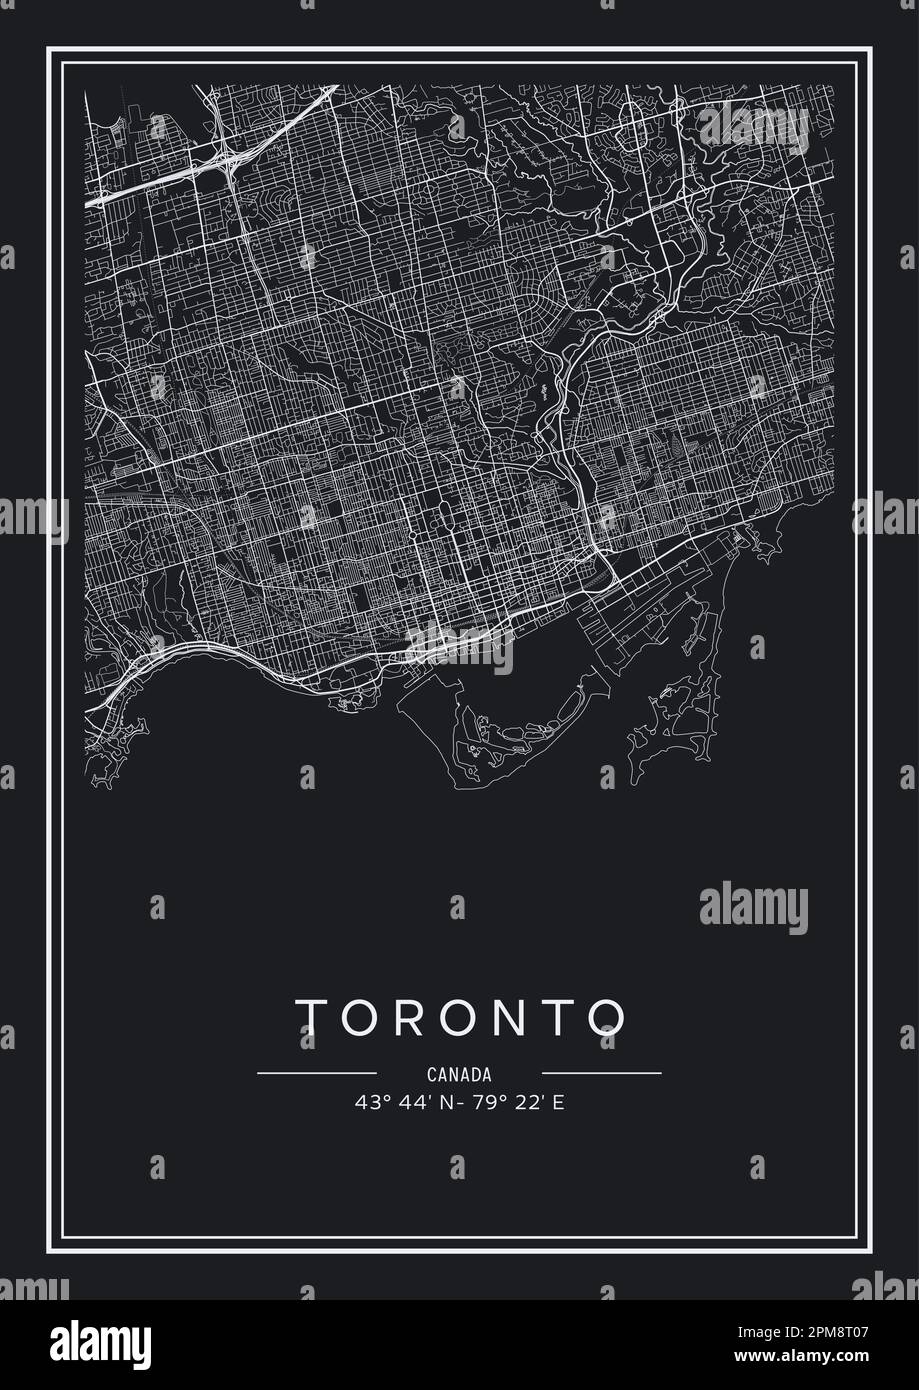 Black and white printable Toronto city map, poster design, vector illistration. Stock Vector